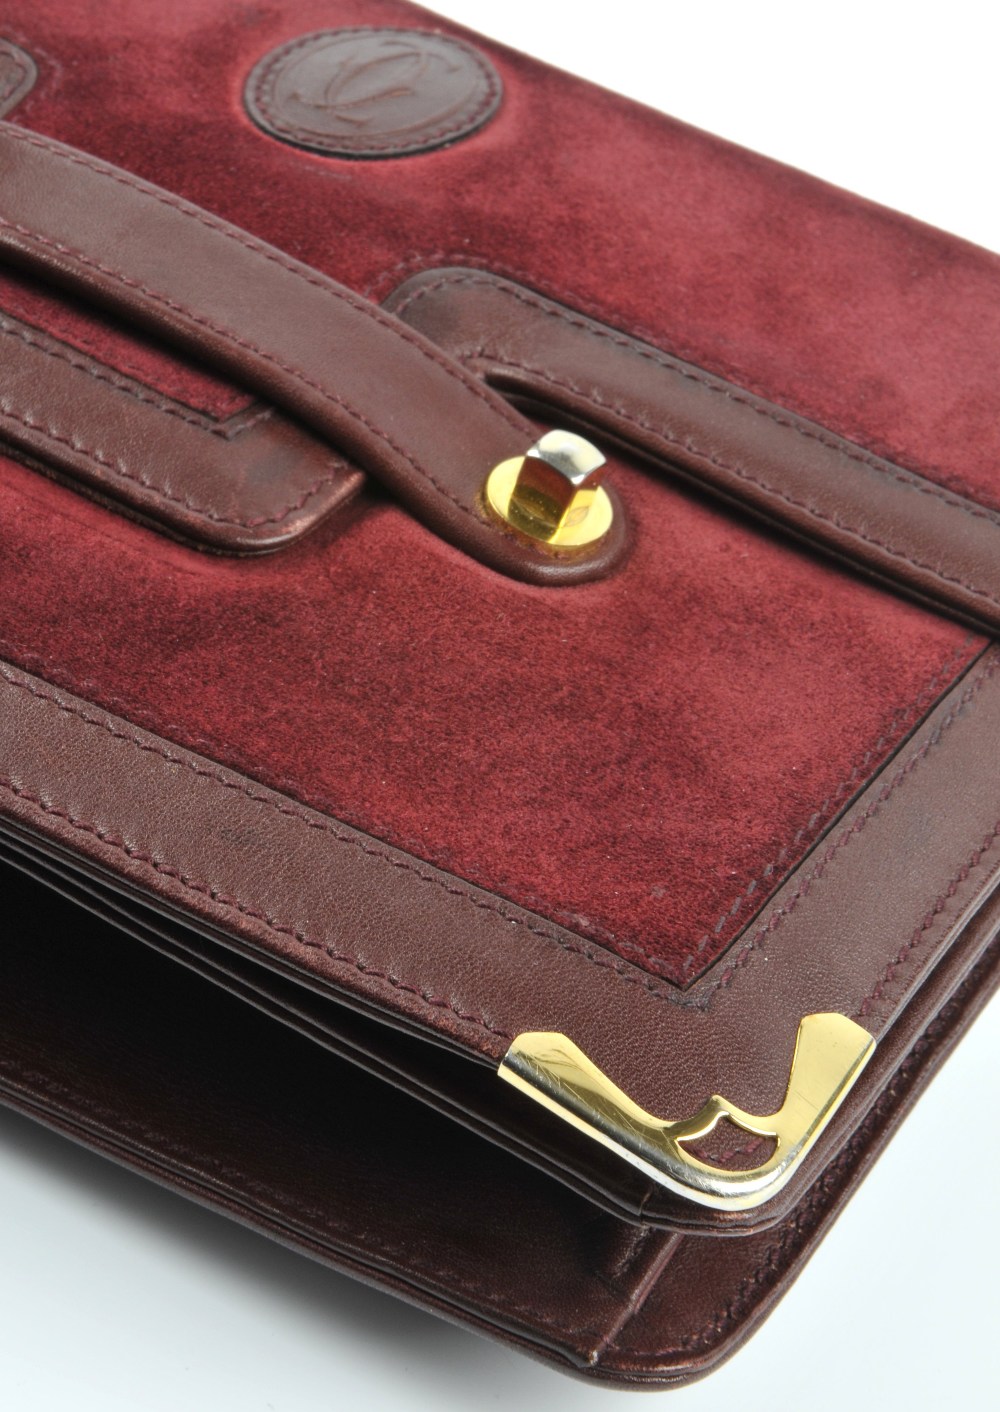 CARTIER - a Bordeaux suede and leather handbag. Designed with a burgundy suede exterior with - Image 5 of 5